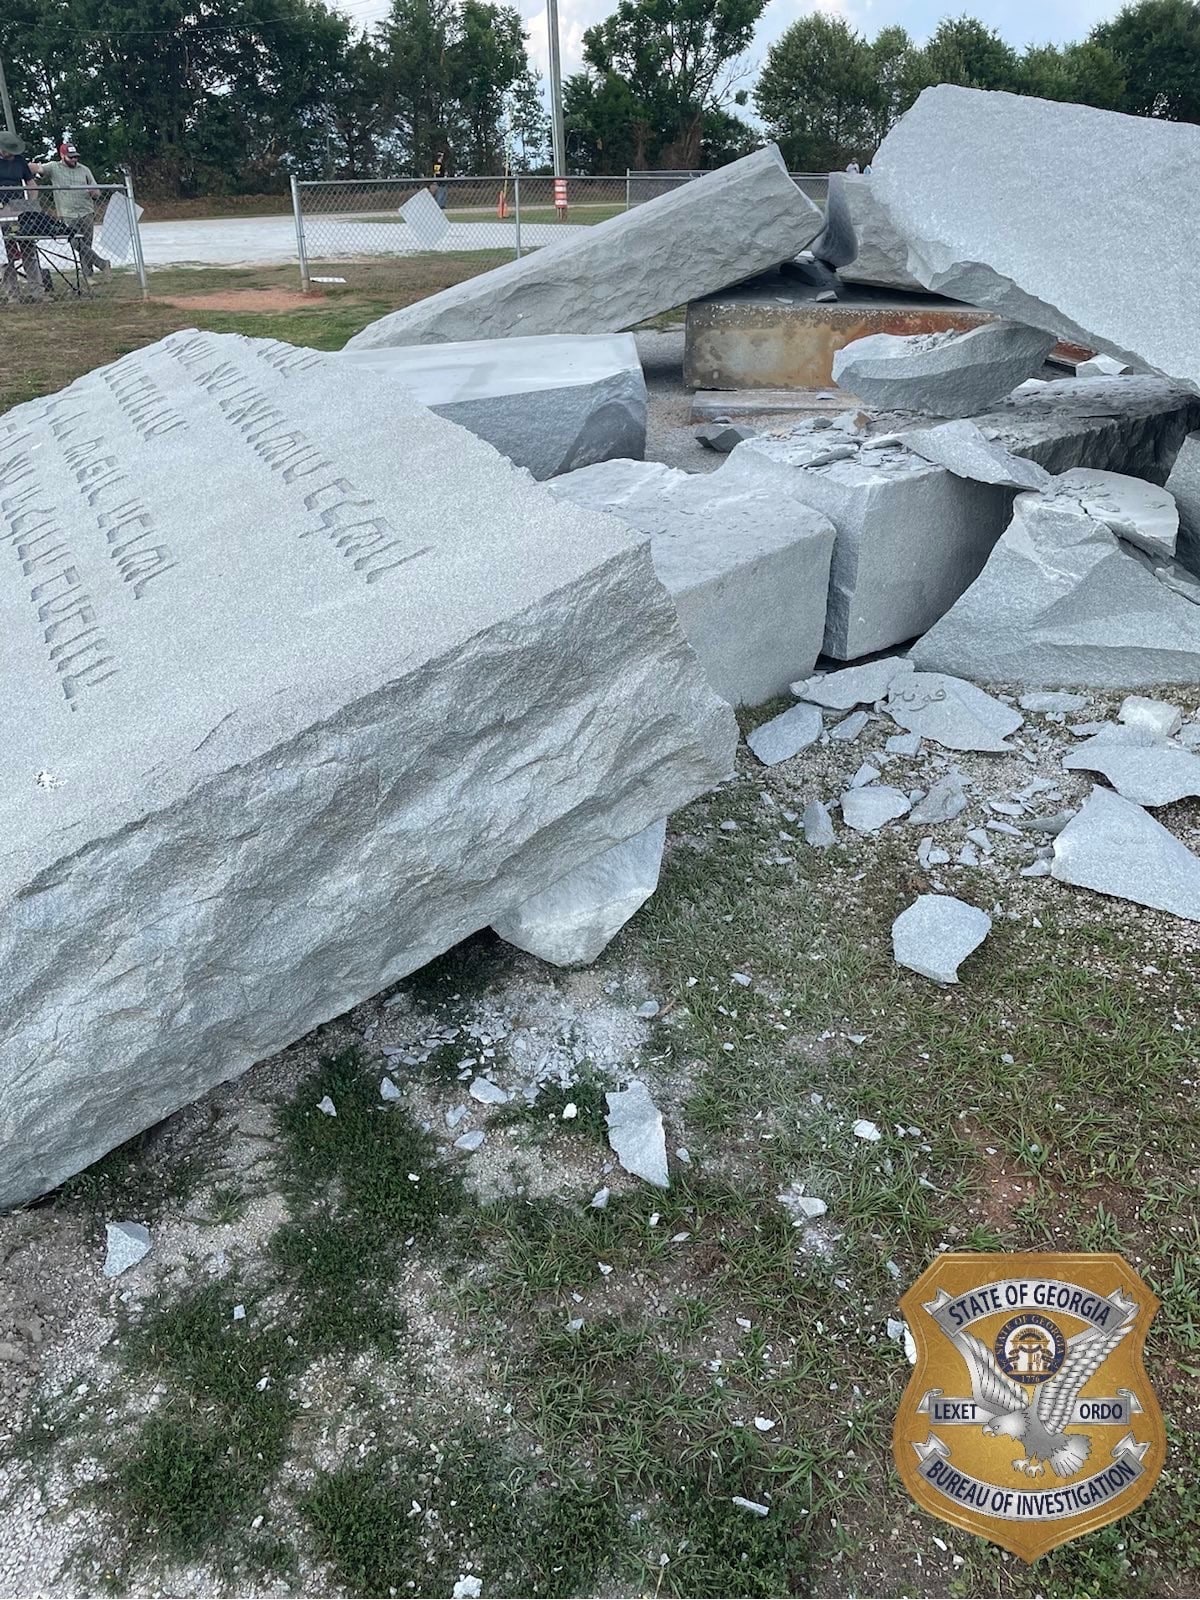 Video: Georgia Guidestones monument destroyed after explosion